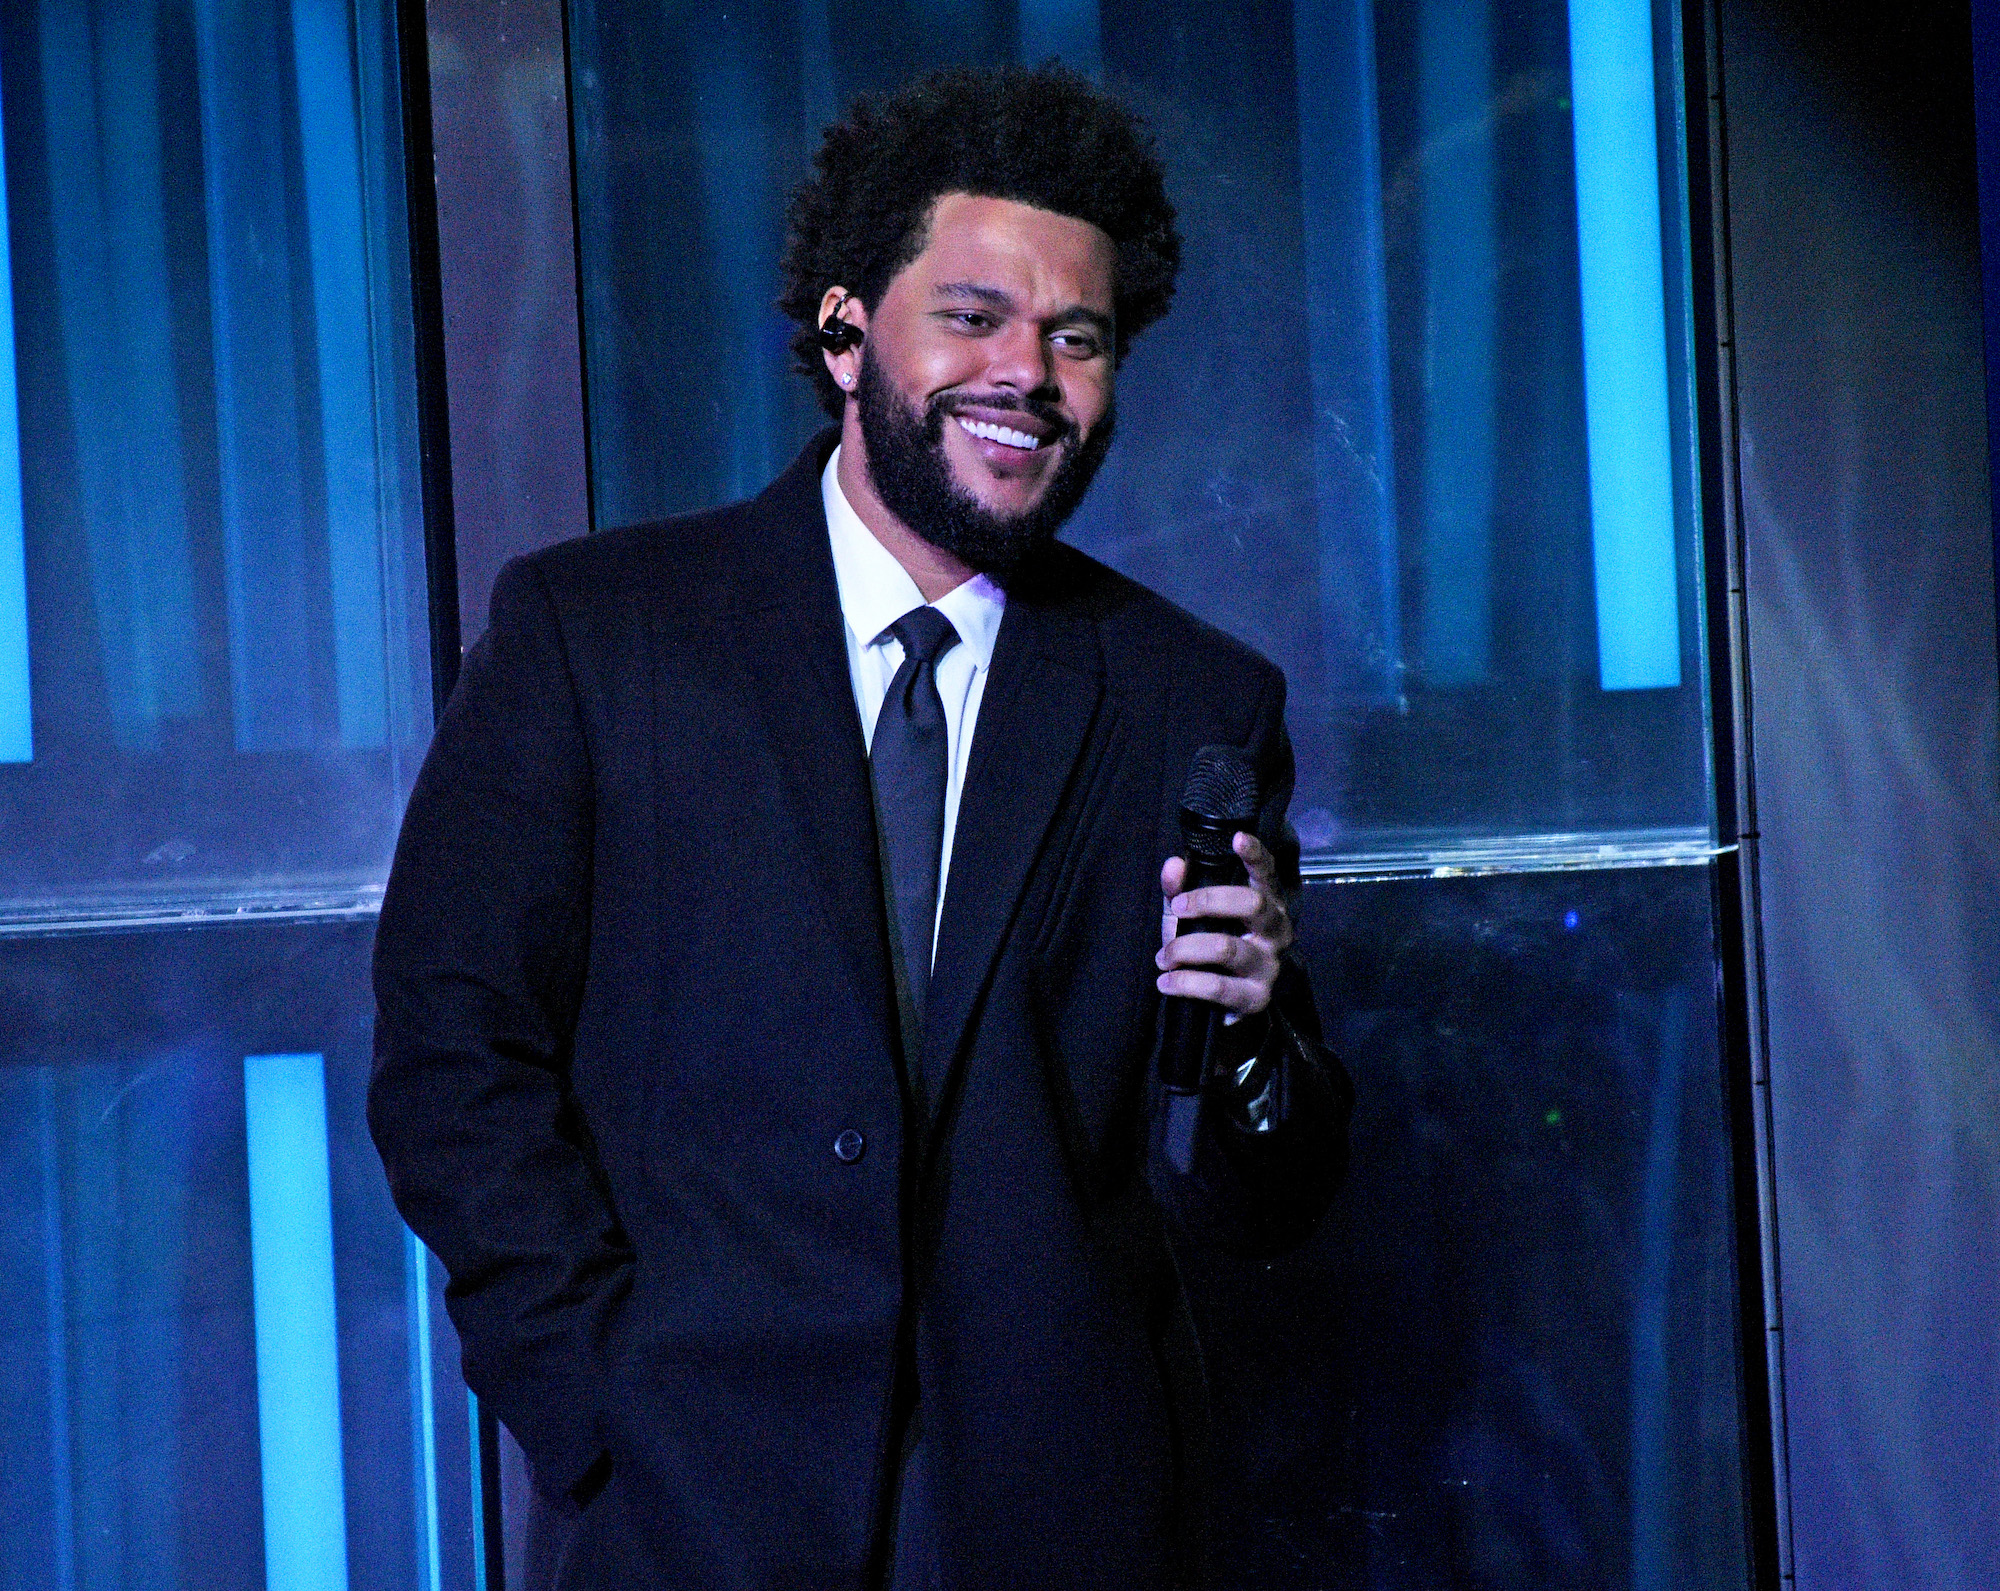 The Weeknd performs at the iHeartRadio Music Awards in Los Angeles on May 27, 2021